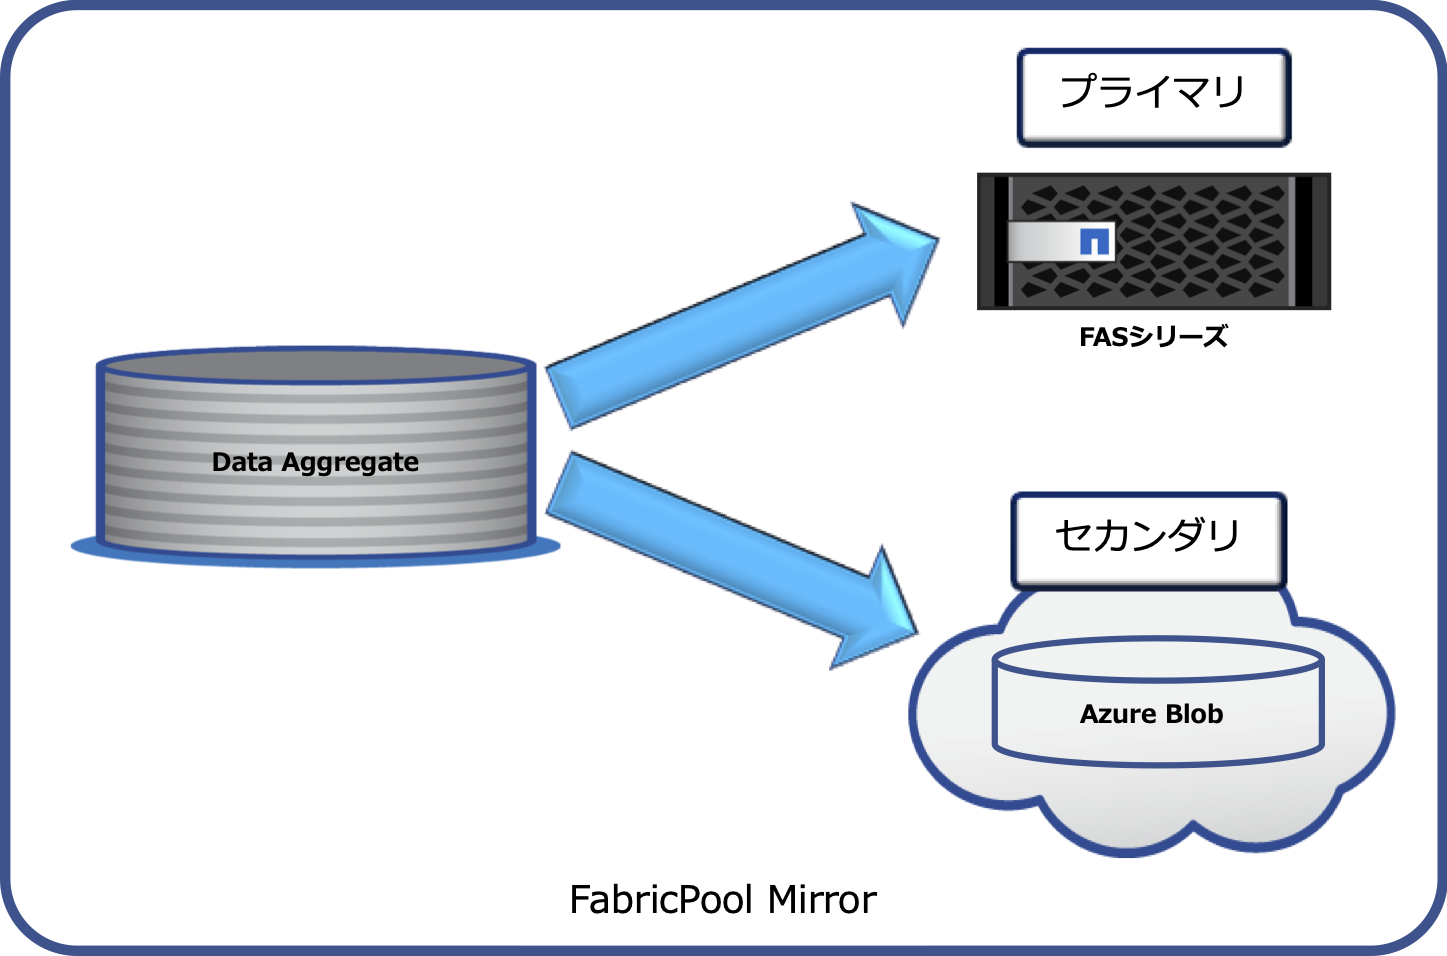 02_ONTAP_S3_FabricPool_Mirrorでの移行.png